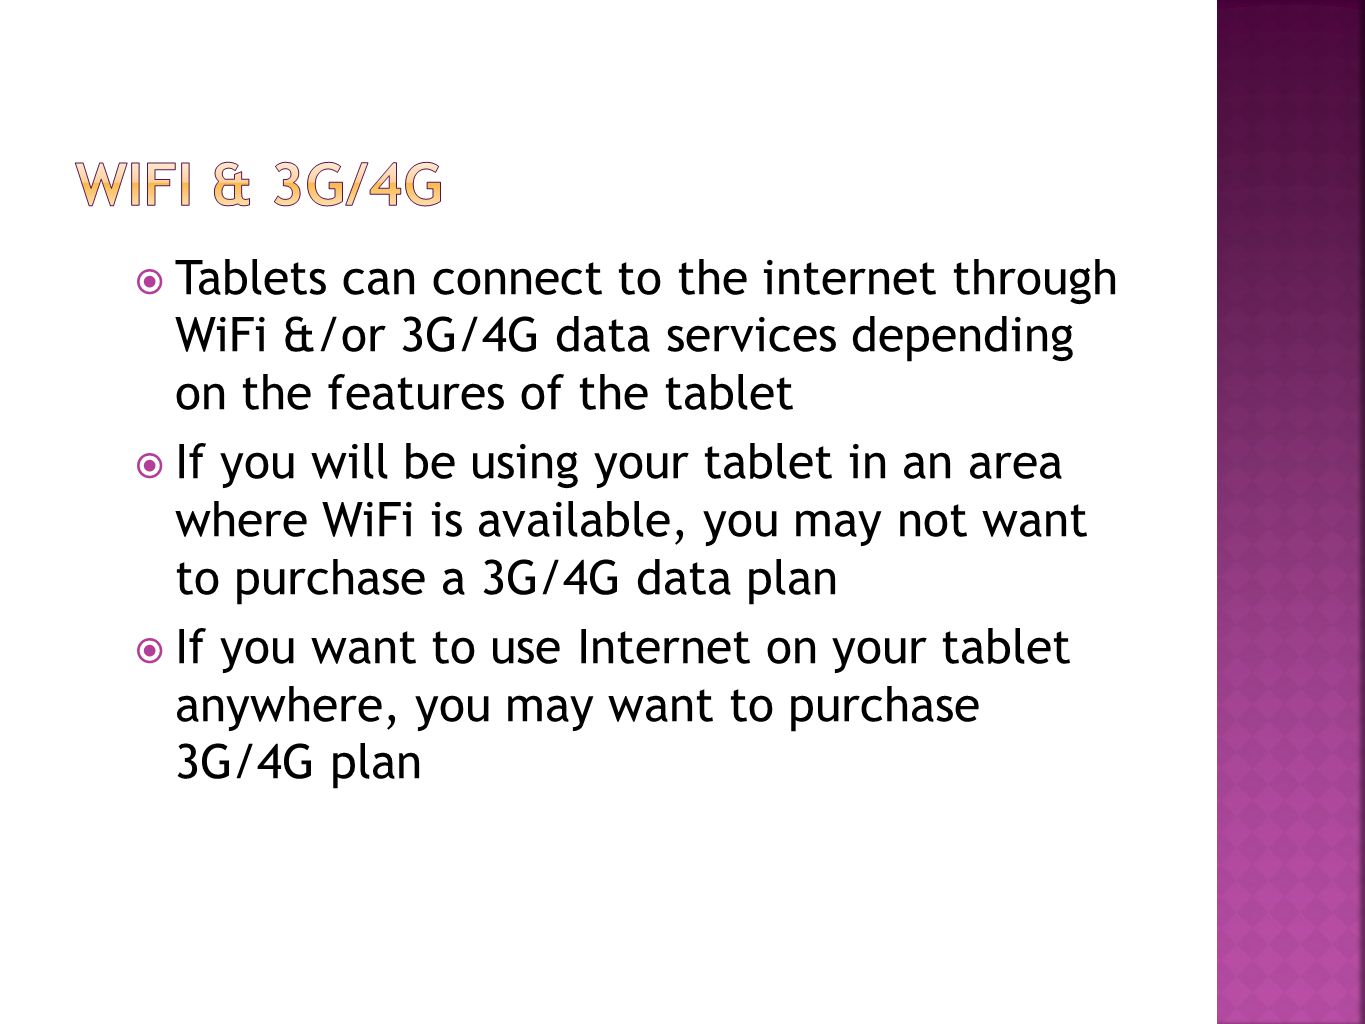  Tablets can connect to the internet through WiFi &/or 3G/4G data services depending on the features of the tablet  If you will be using your tablet in an area where WiFi is available, you may not want to purchase a 3G/4G data plan  If you want to use Internet on your tablet anywhere, you may want to purchase 3G/4G plan